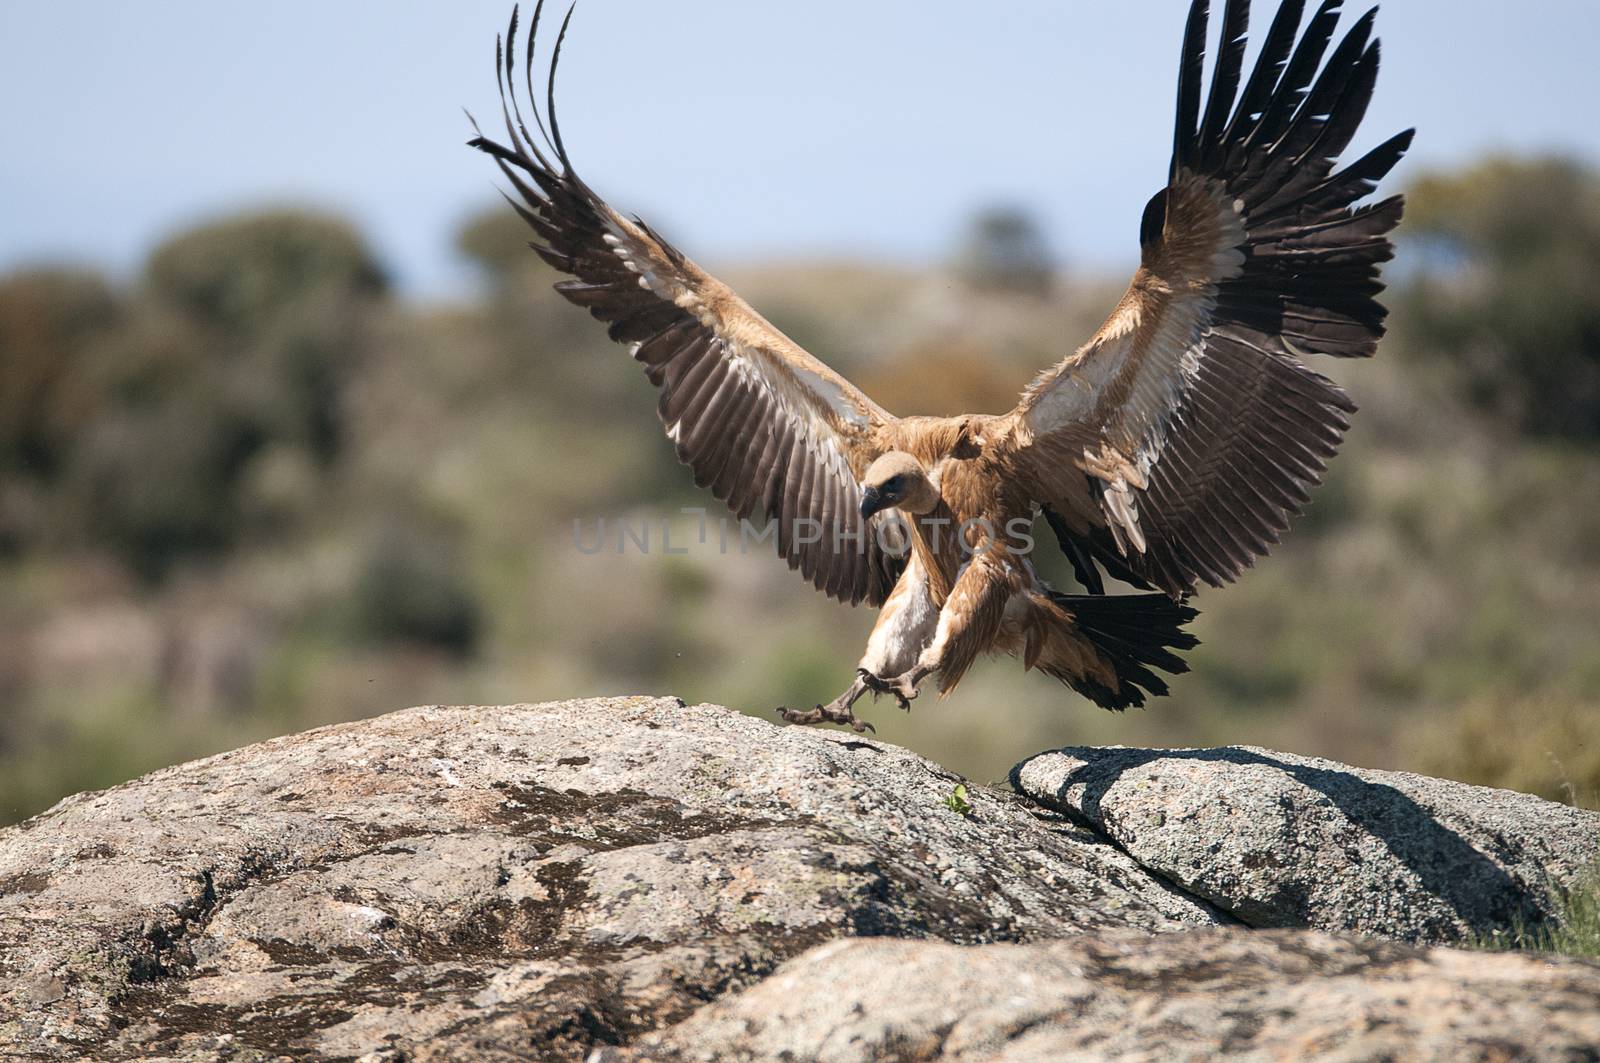 Griffon Vulture (Gyps fulvus) with open wings, flying scavenger  by jalonsohu@gmail.com